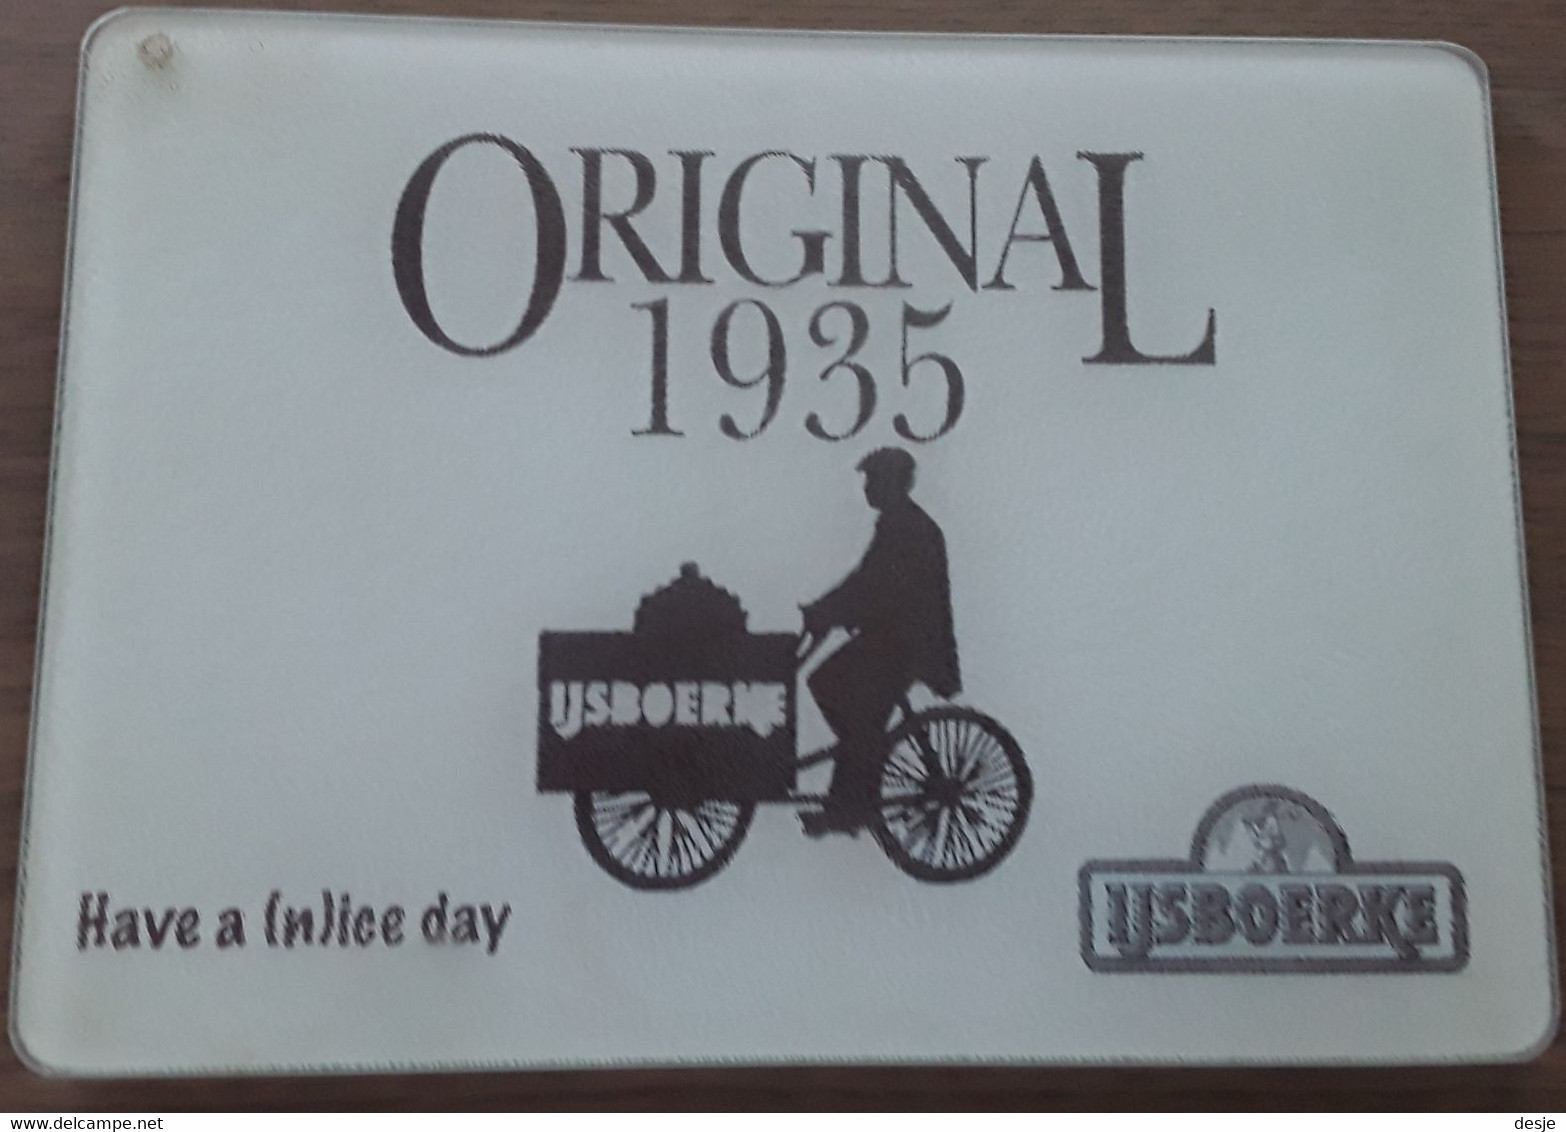 Ijsboerke Original 1935 Have A (n)ice Day - Affiches